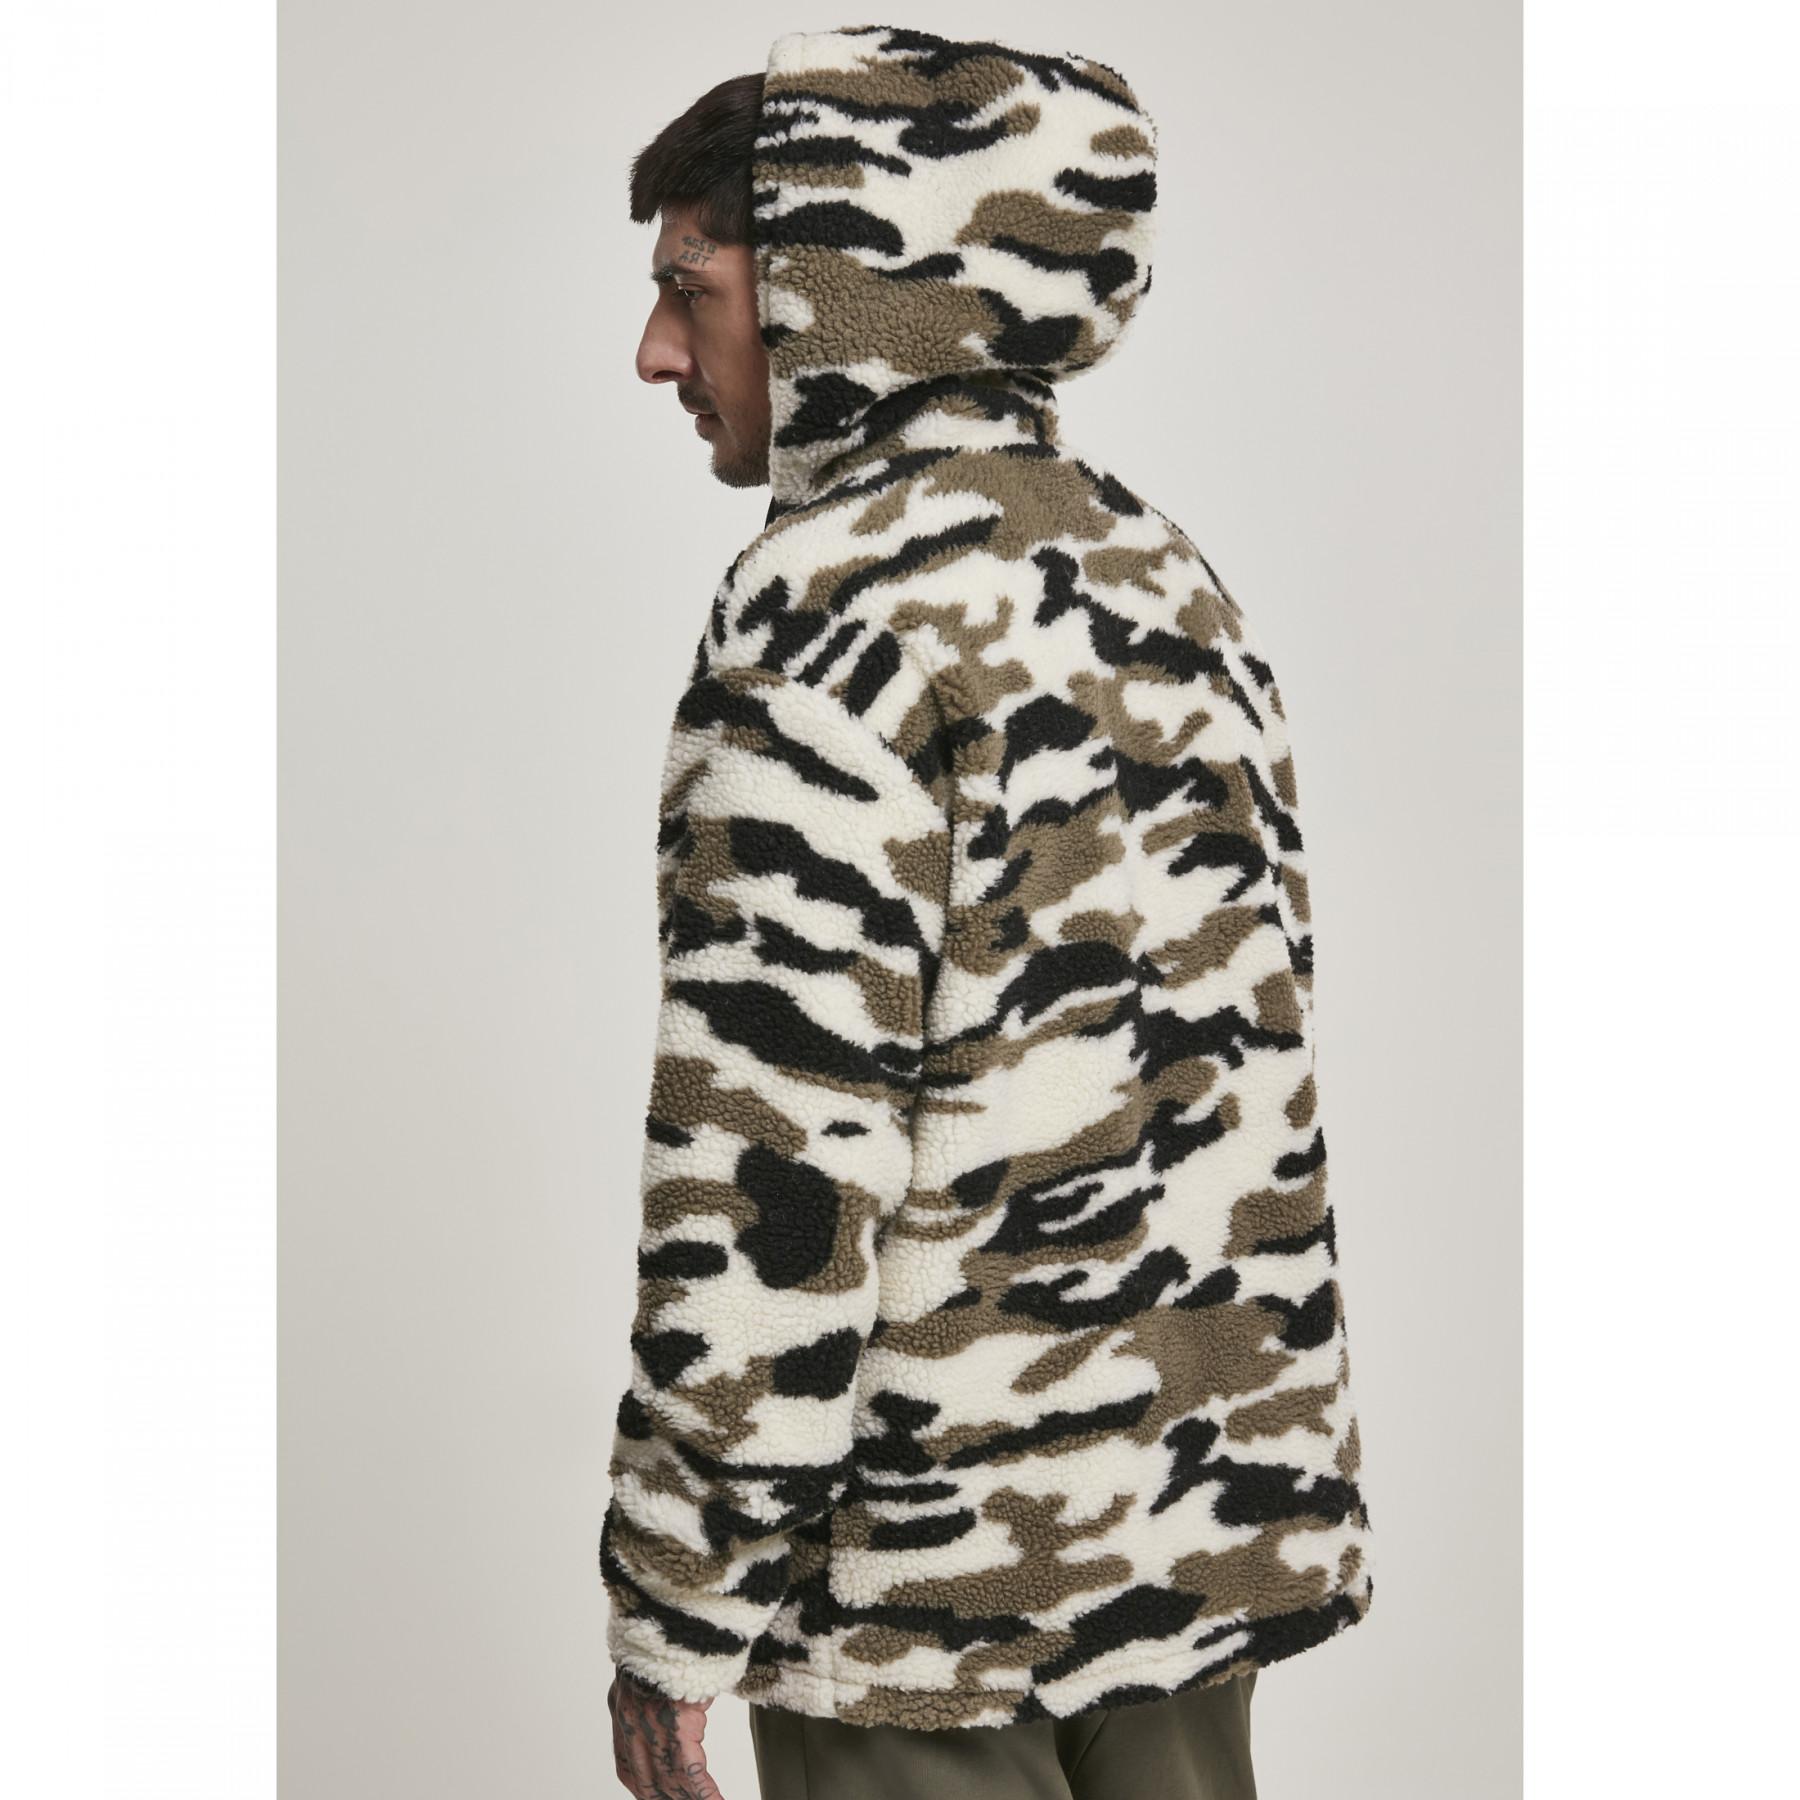 Urban classic sherpa pull over parka